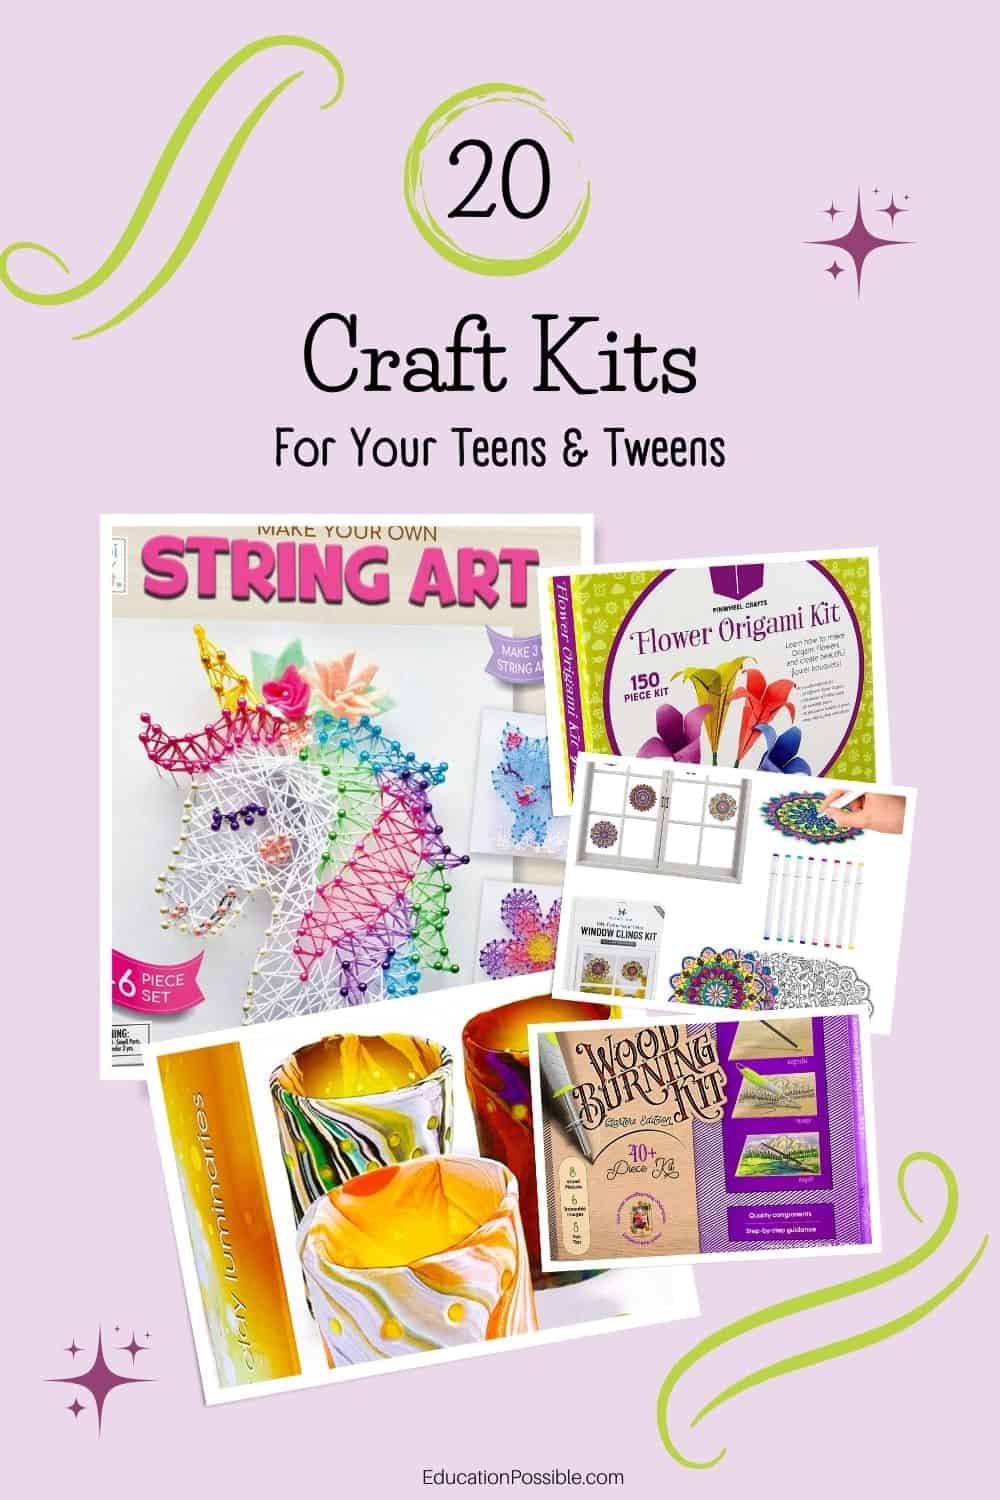 The Best Craft Kits for Teens and Tweens